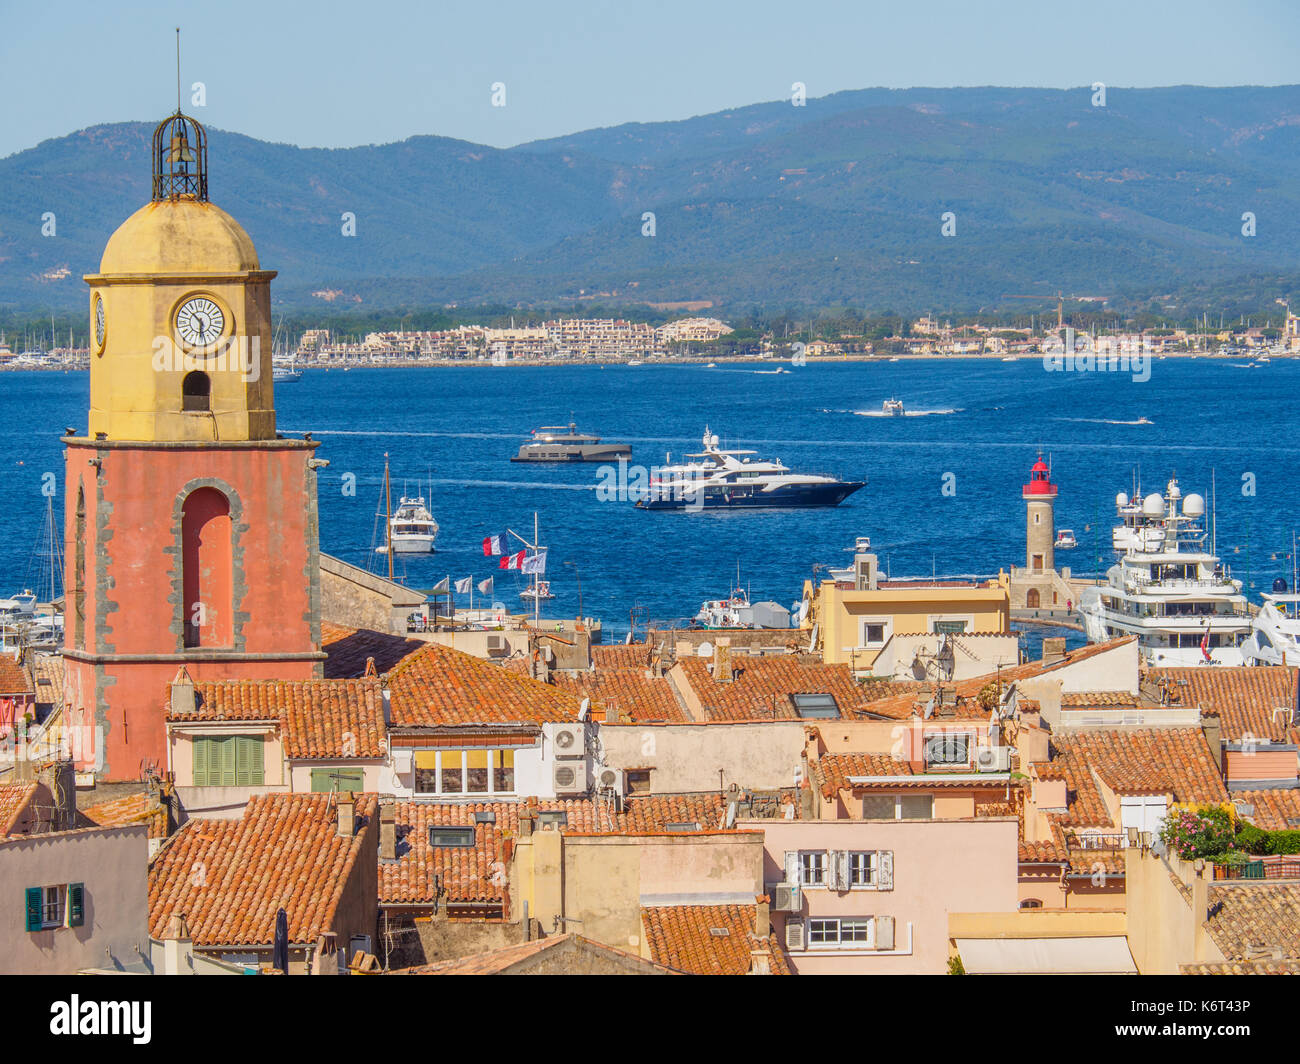 An overview of the town of Saint Tropez Stock Photo - Alamy